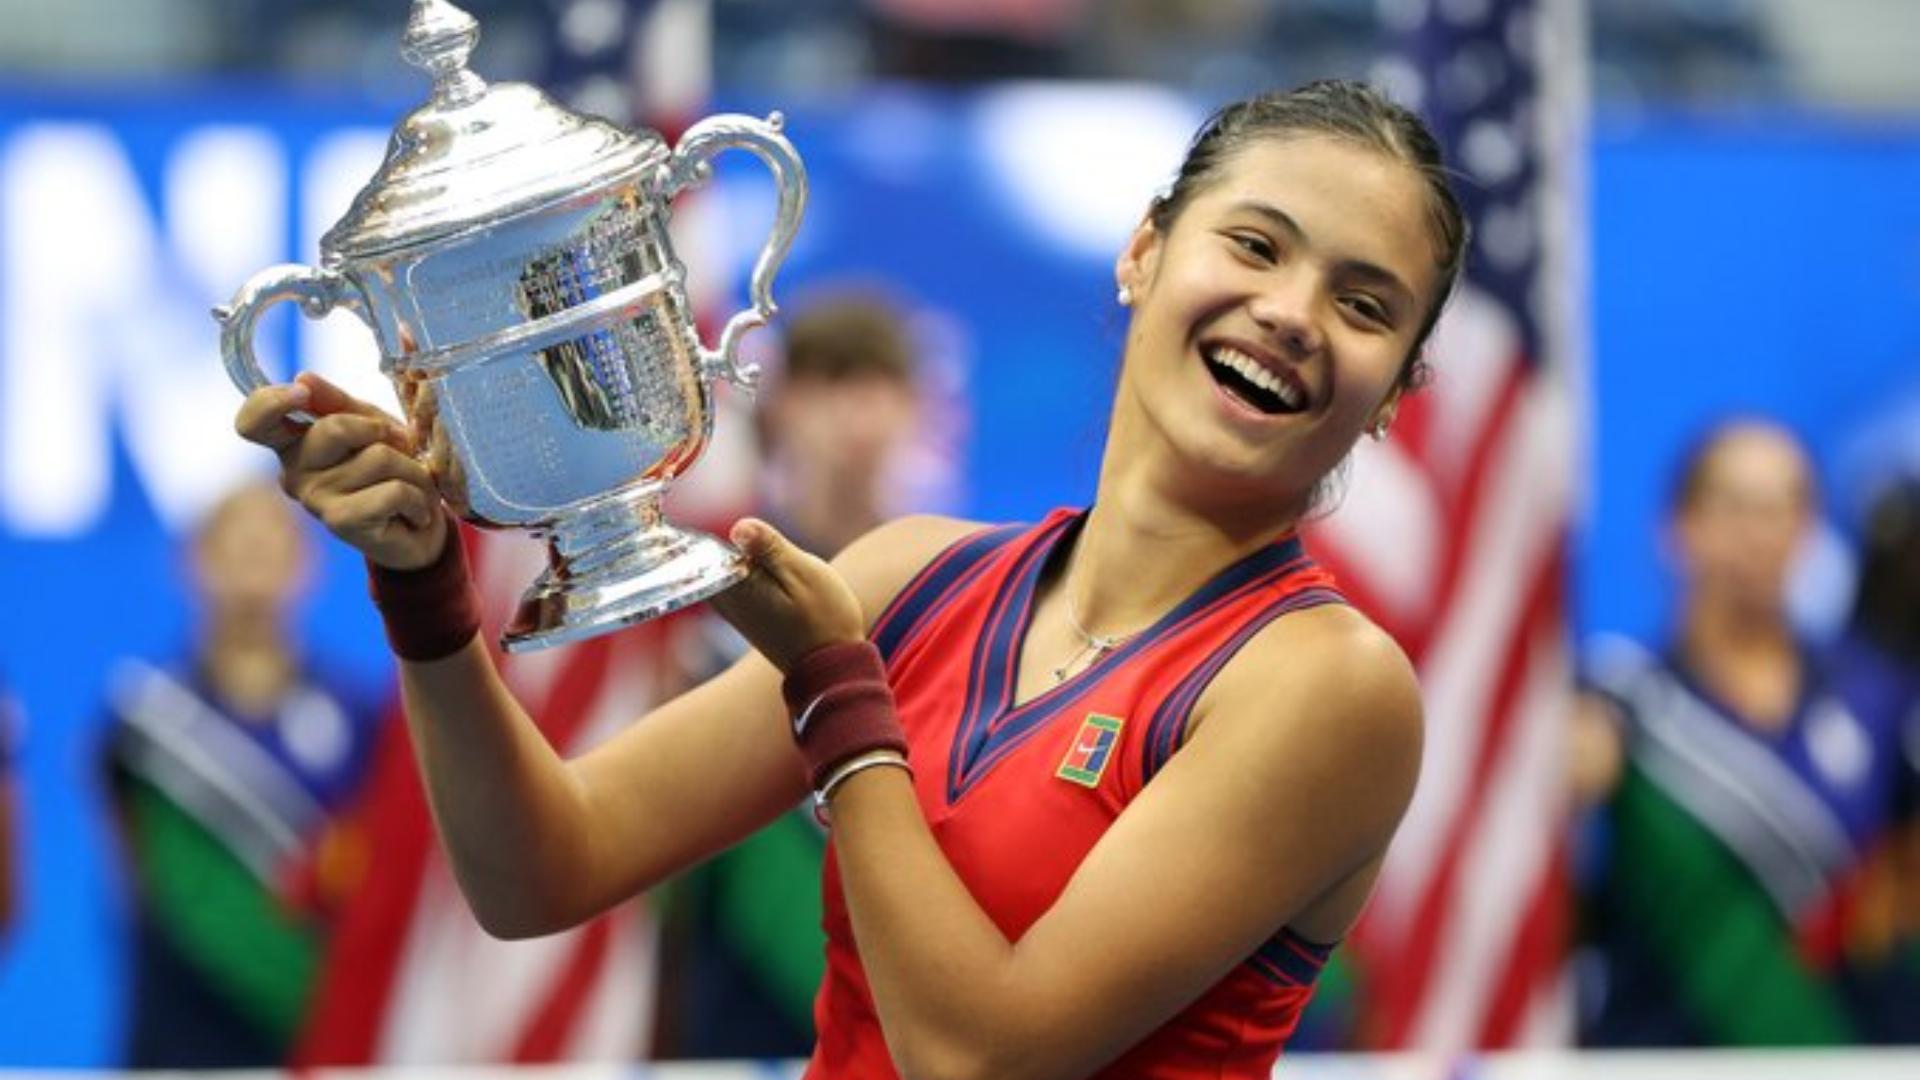 Emma Raducanu has become a millionaire just at the age of 19 after her win in the US Open.